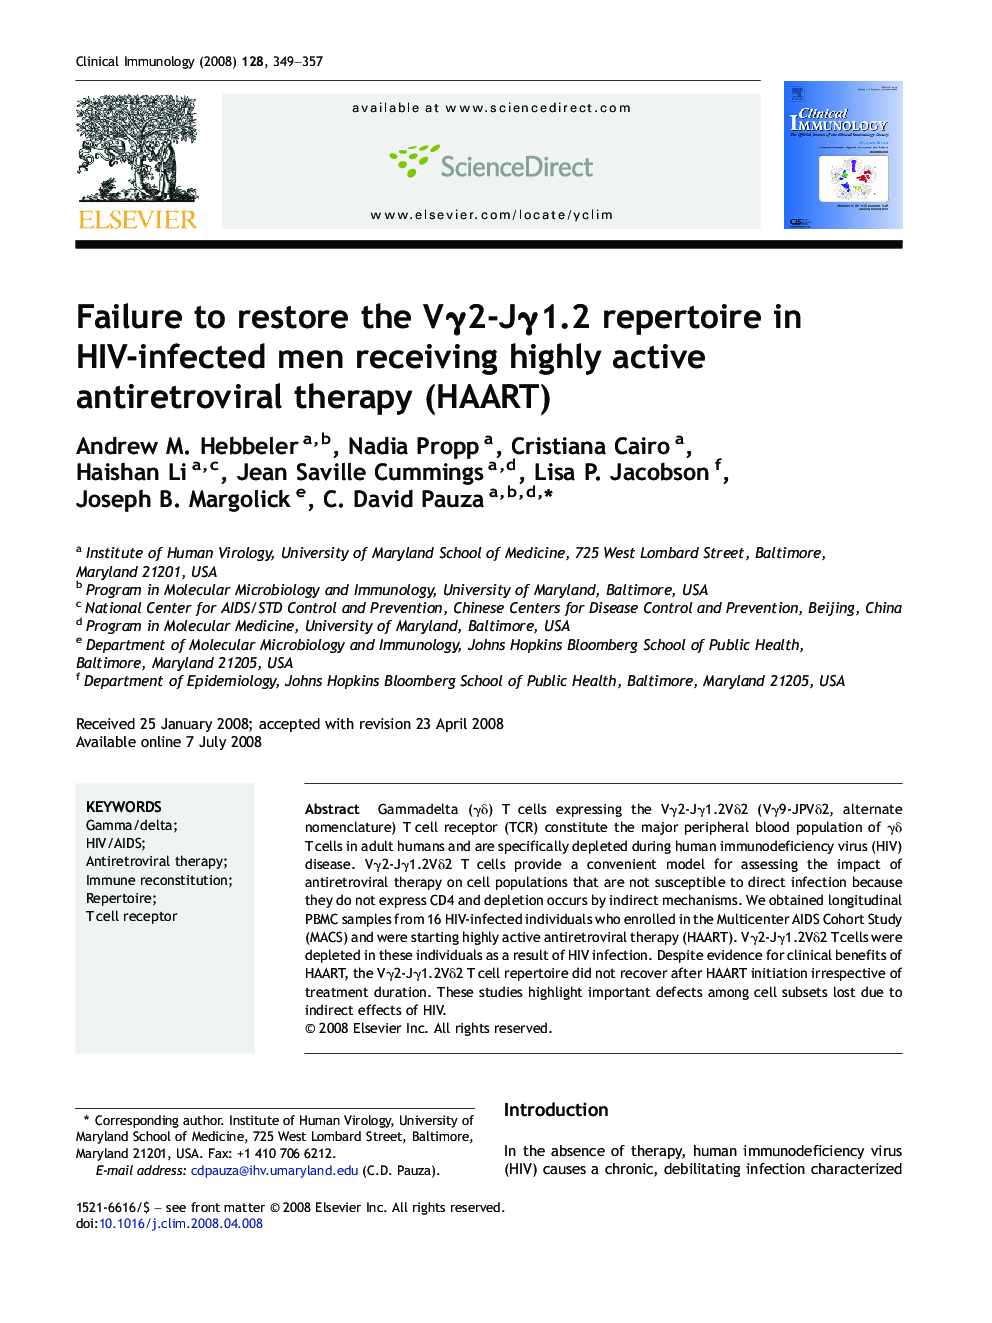 Failure to restore the VÎ³2-JÎ³1.2 repertoire in HIV-infected men receiving highly active antiretroviral therapy (HAART)